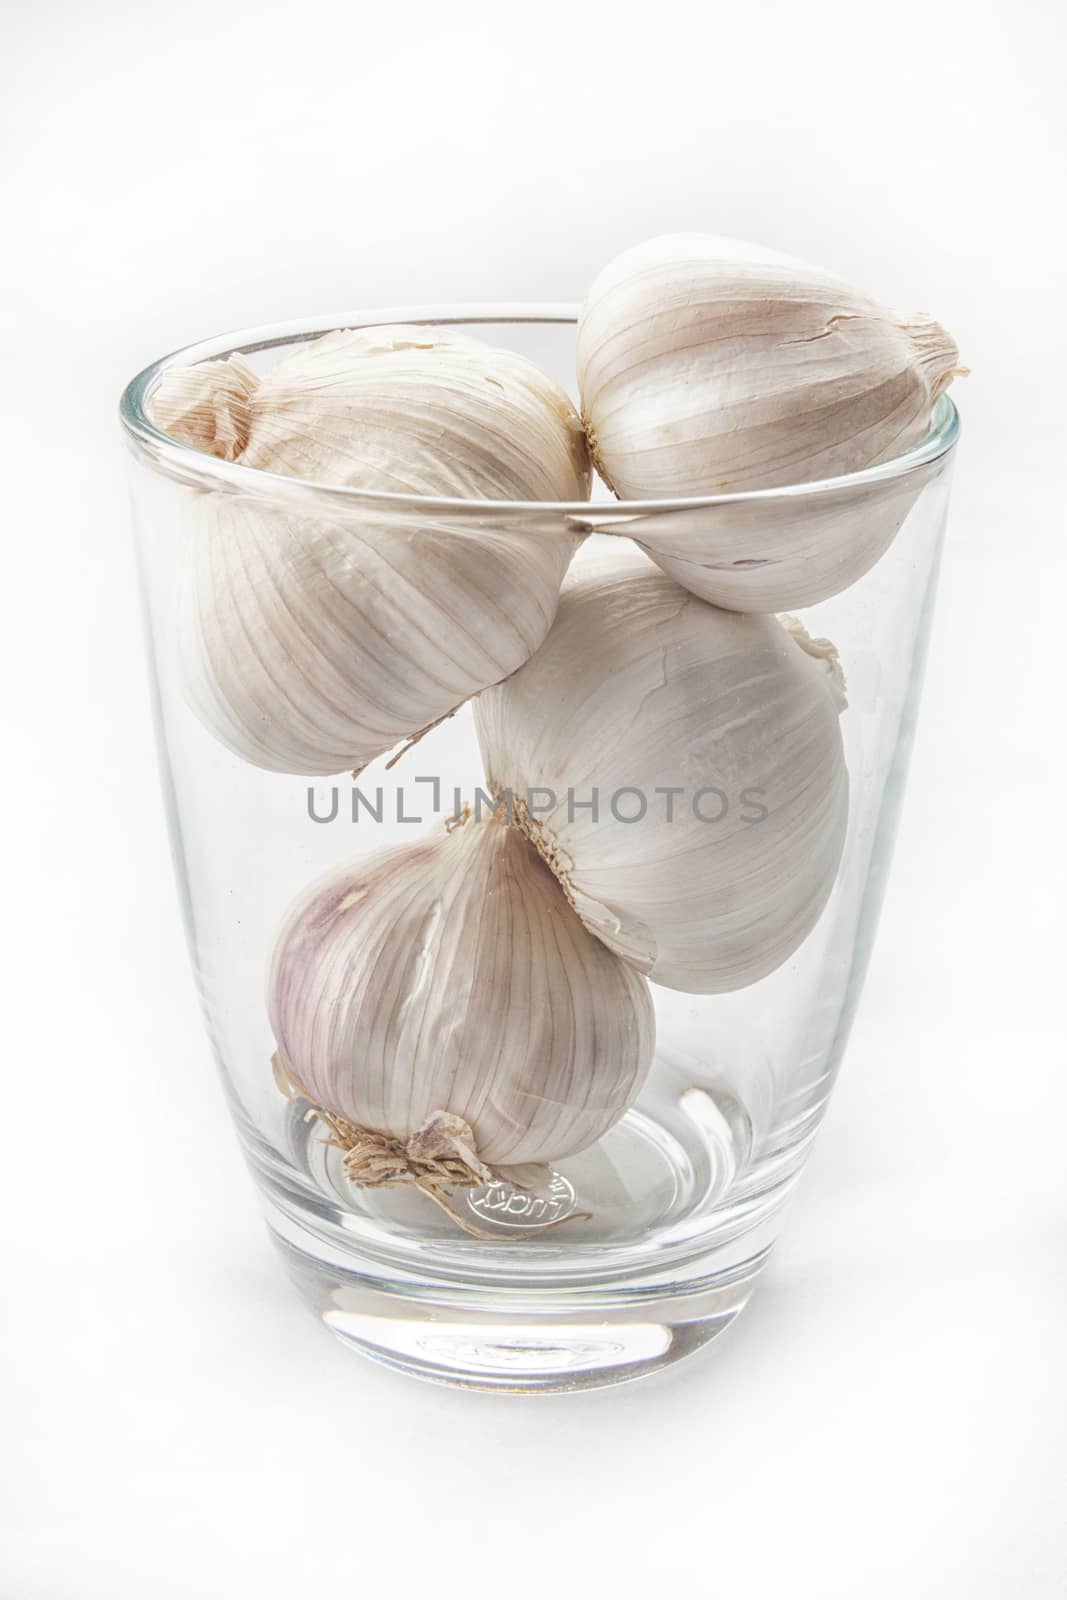 Fresh garlic in glass isolated on white background .